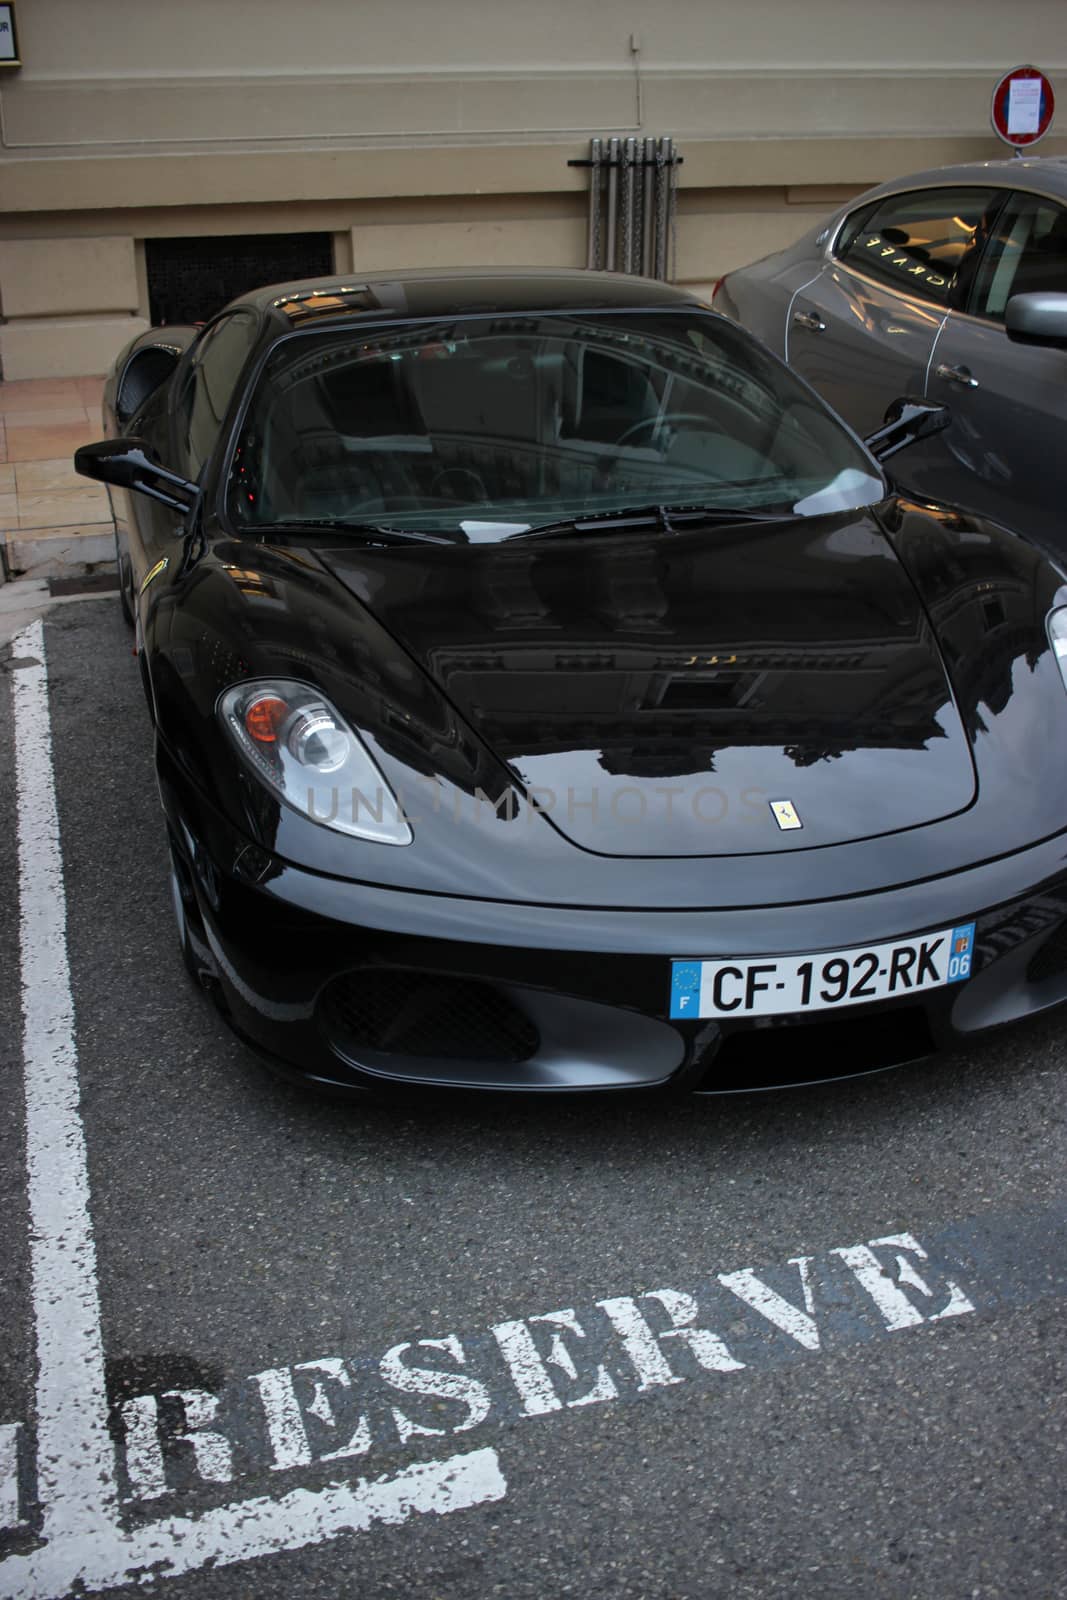 Ferrari Parked in a Reserved Parking Space by bensib